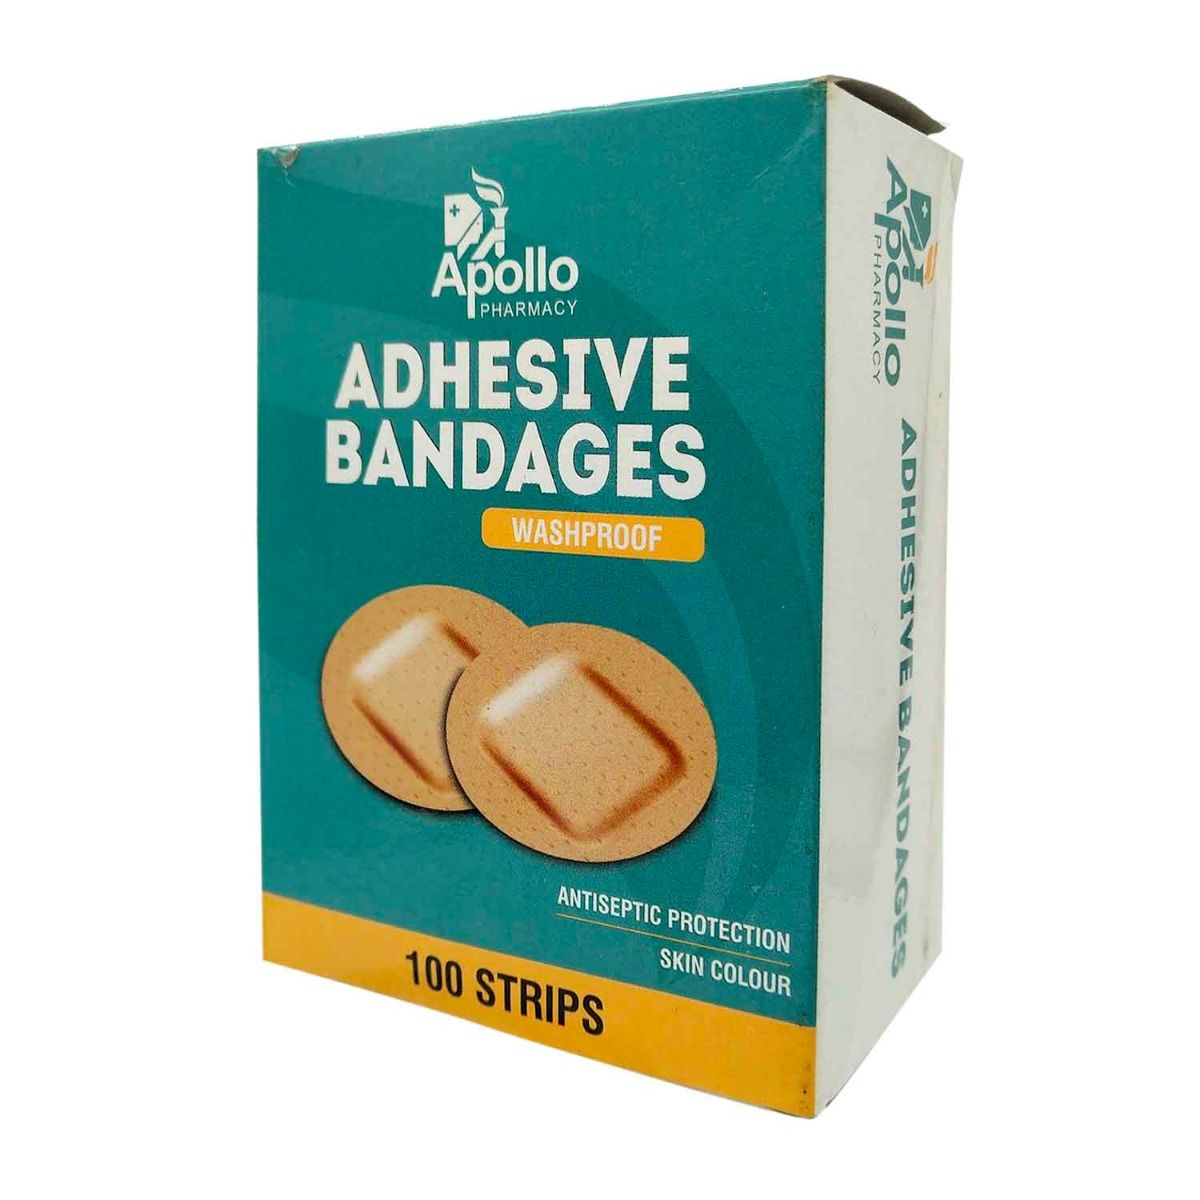 Apollo Pharmacy Adhesive Round Bandage Wash Proof, 3 Count, Pack of 3 S